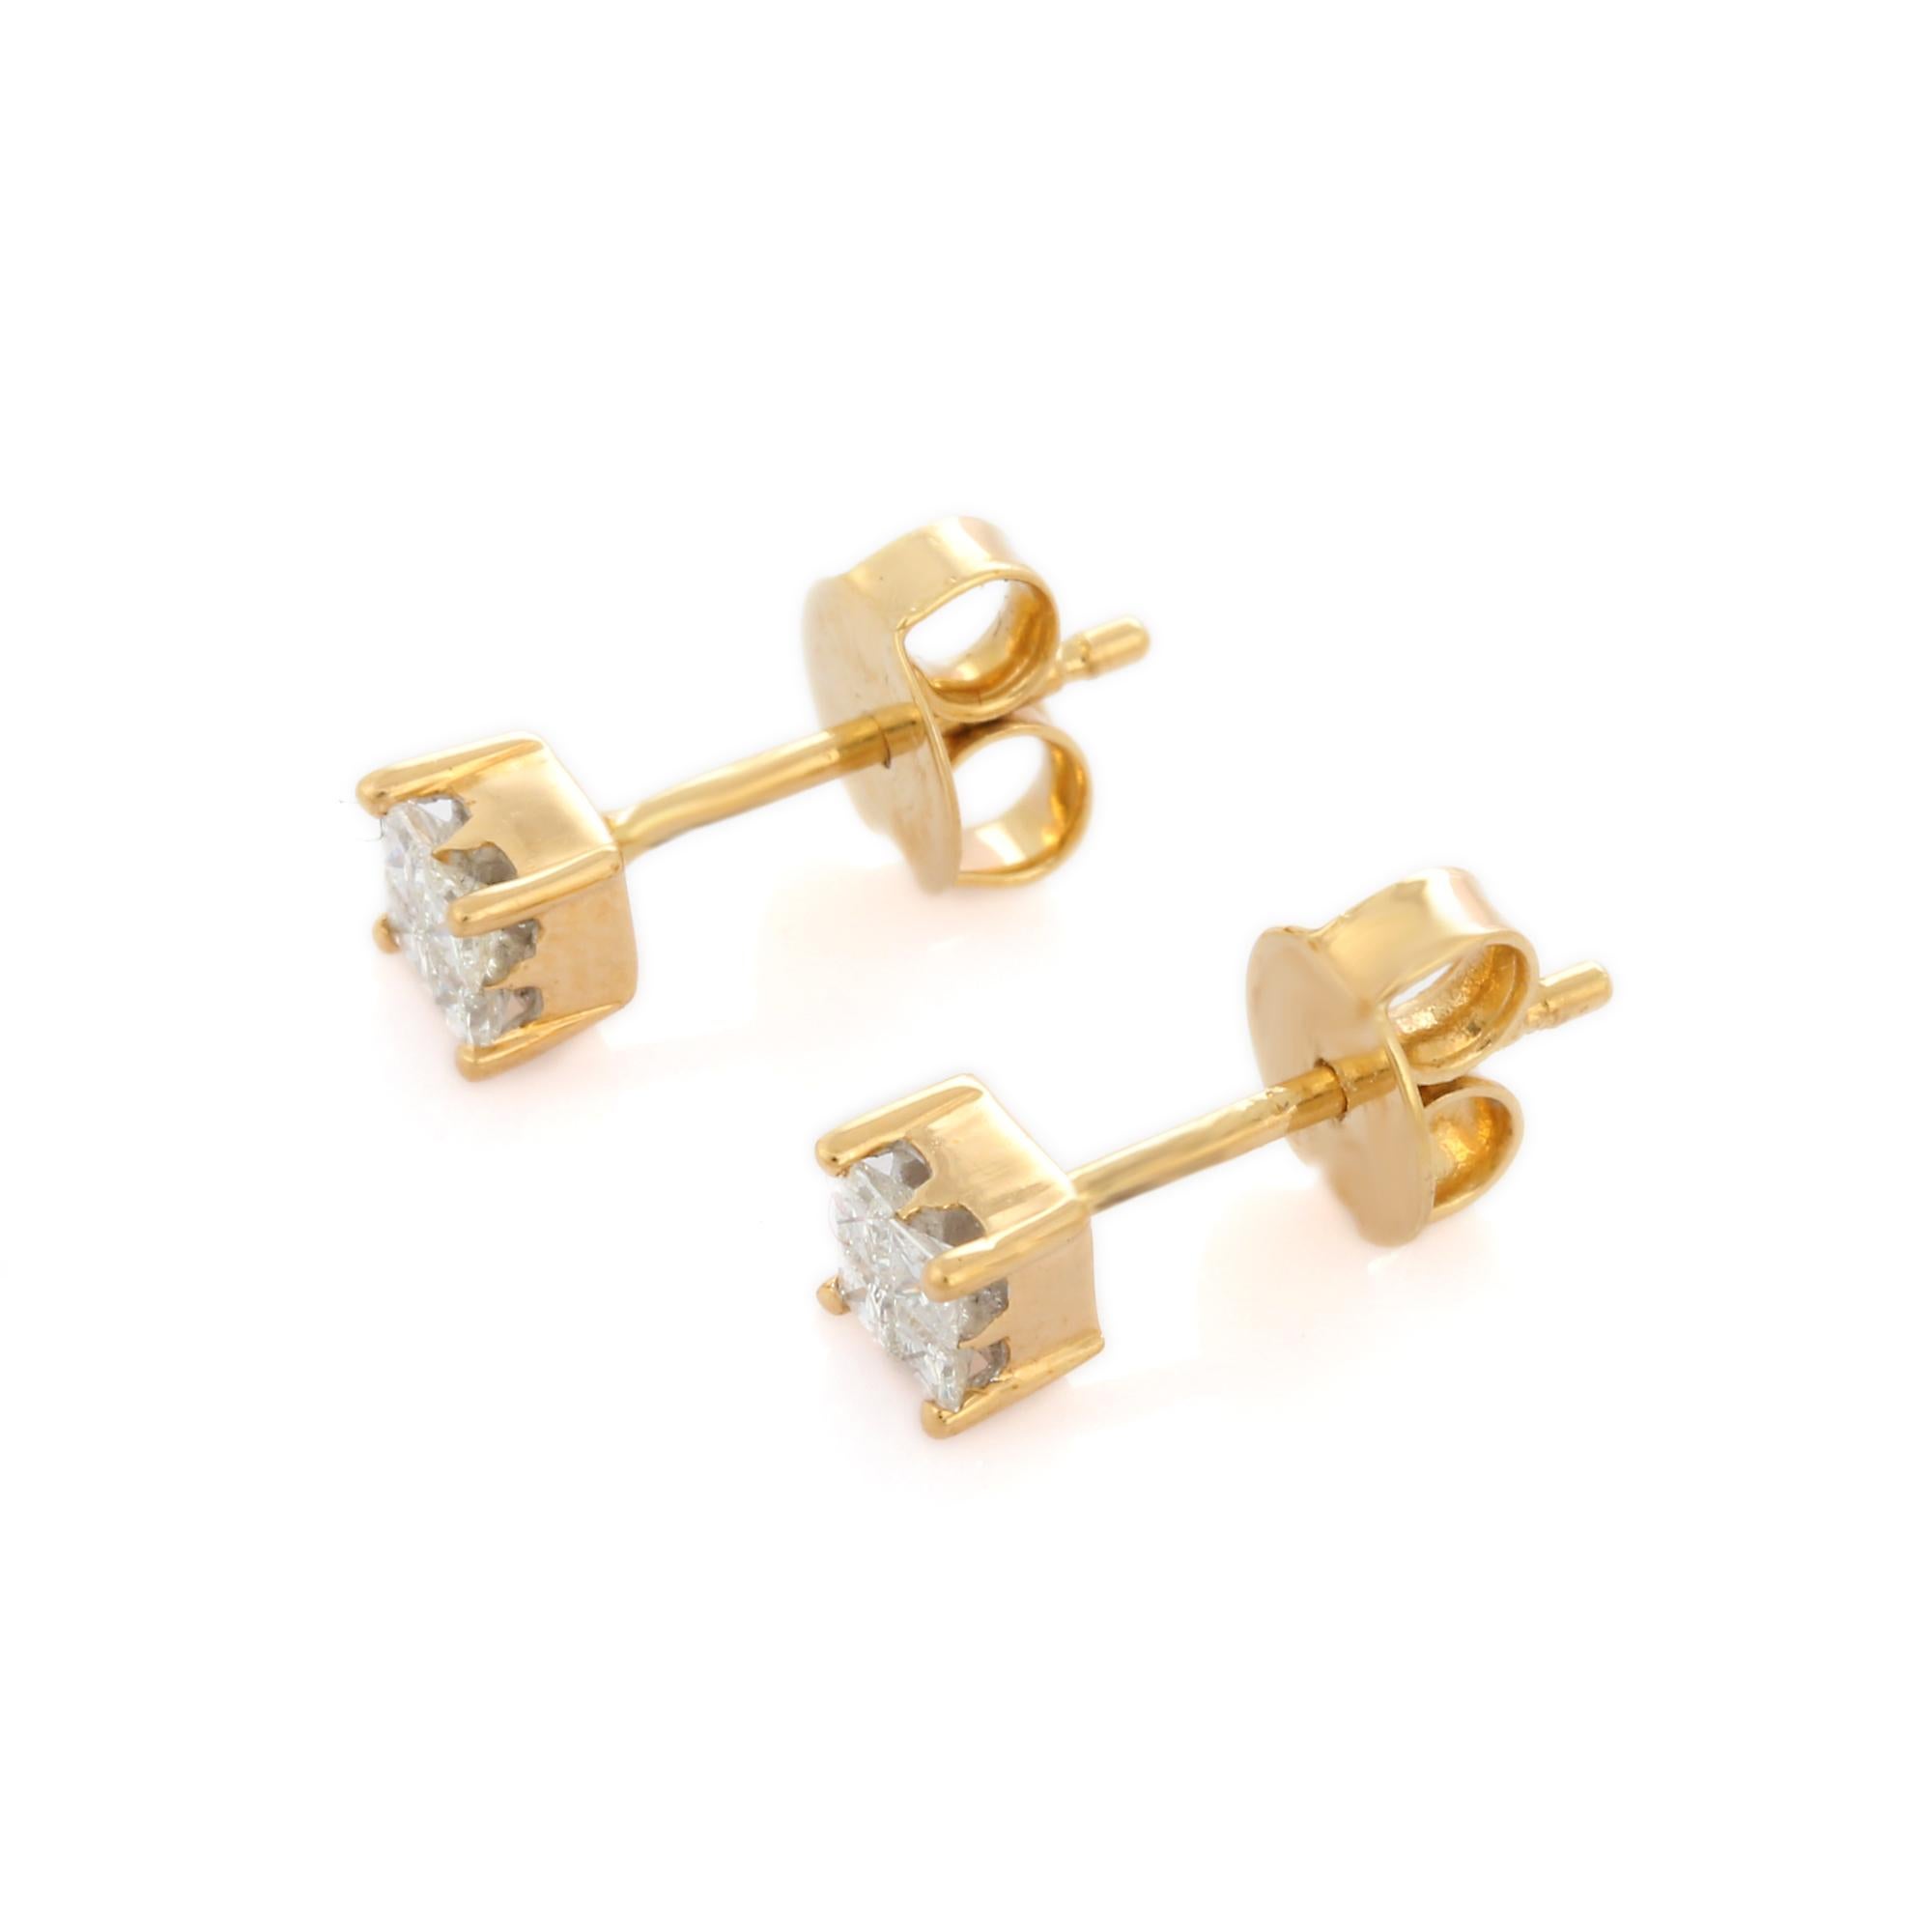 Princess Diamond Everyday Stud Earrings in 18K Gold to make a statement with your look. You shall need stud earrings to make a statement with your look. These earrings create a sparkling, luxurious look featuring princess cut diamond.
April